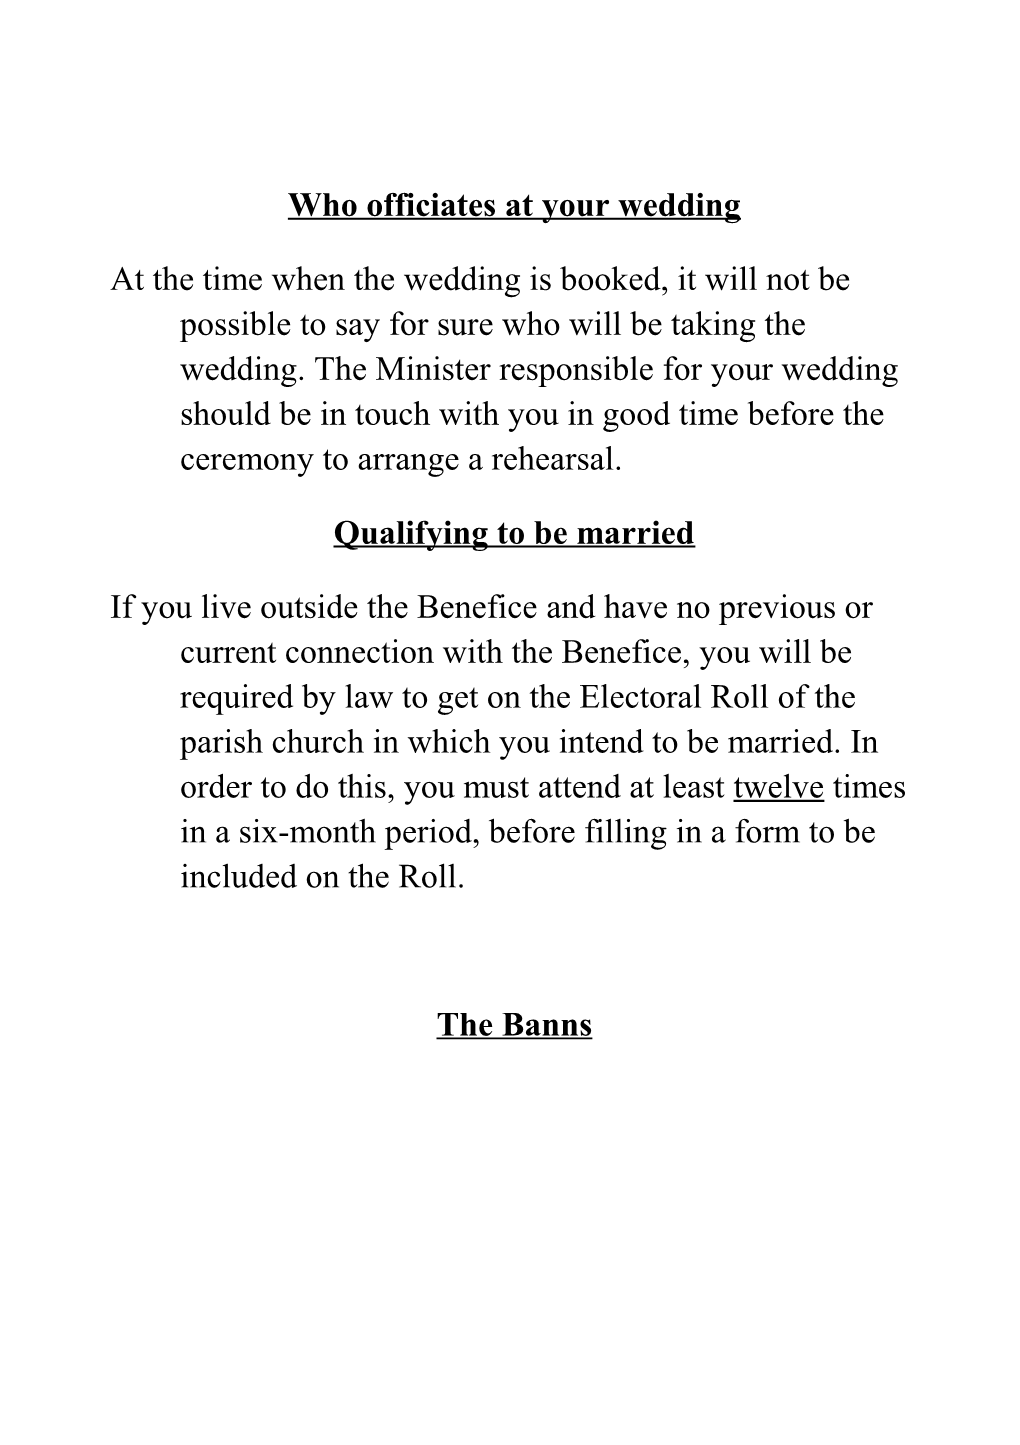 Information for Couples Intending to Be Married